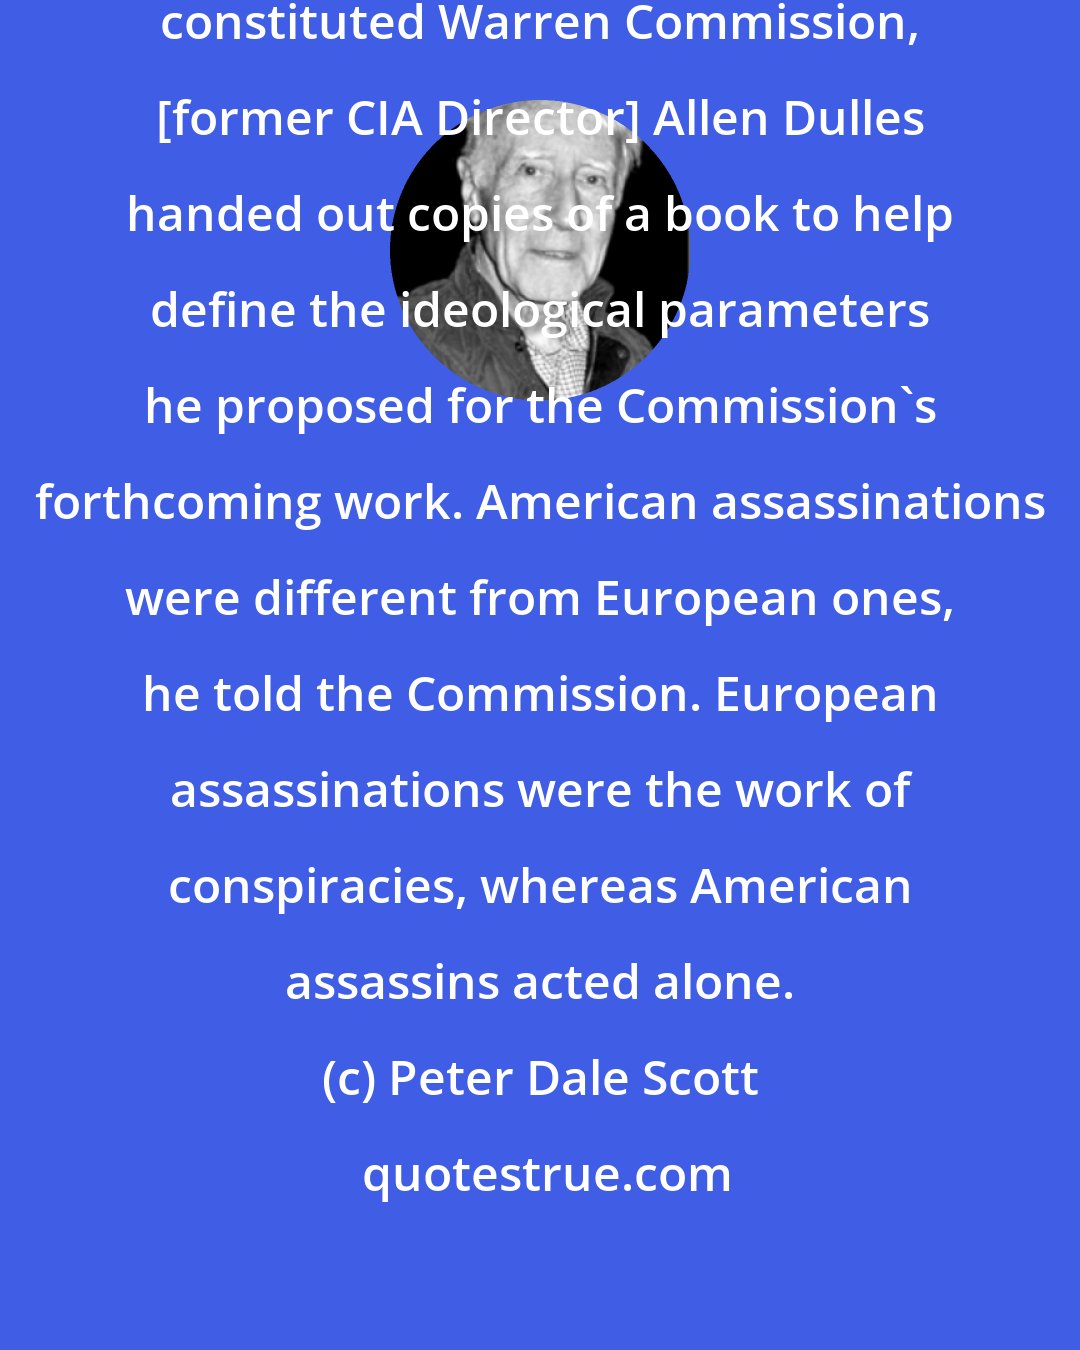 Peter Dale Scott: At the first meeting of the newly constituted Warren Commission, [former CIA Director] Allen Dulles handed out copies of a book to help define the ideological parameters he proposed for the Commission's forthcoming work. American assassinations were different from European ones, he told the Commission. European assassinations were the work of conspiracies, whereas American assassins acted alone.